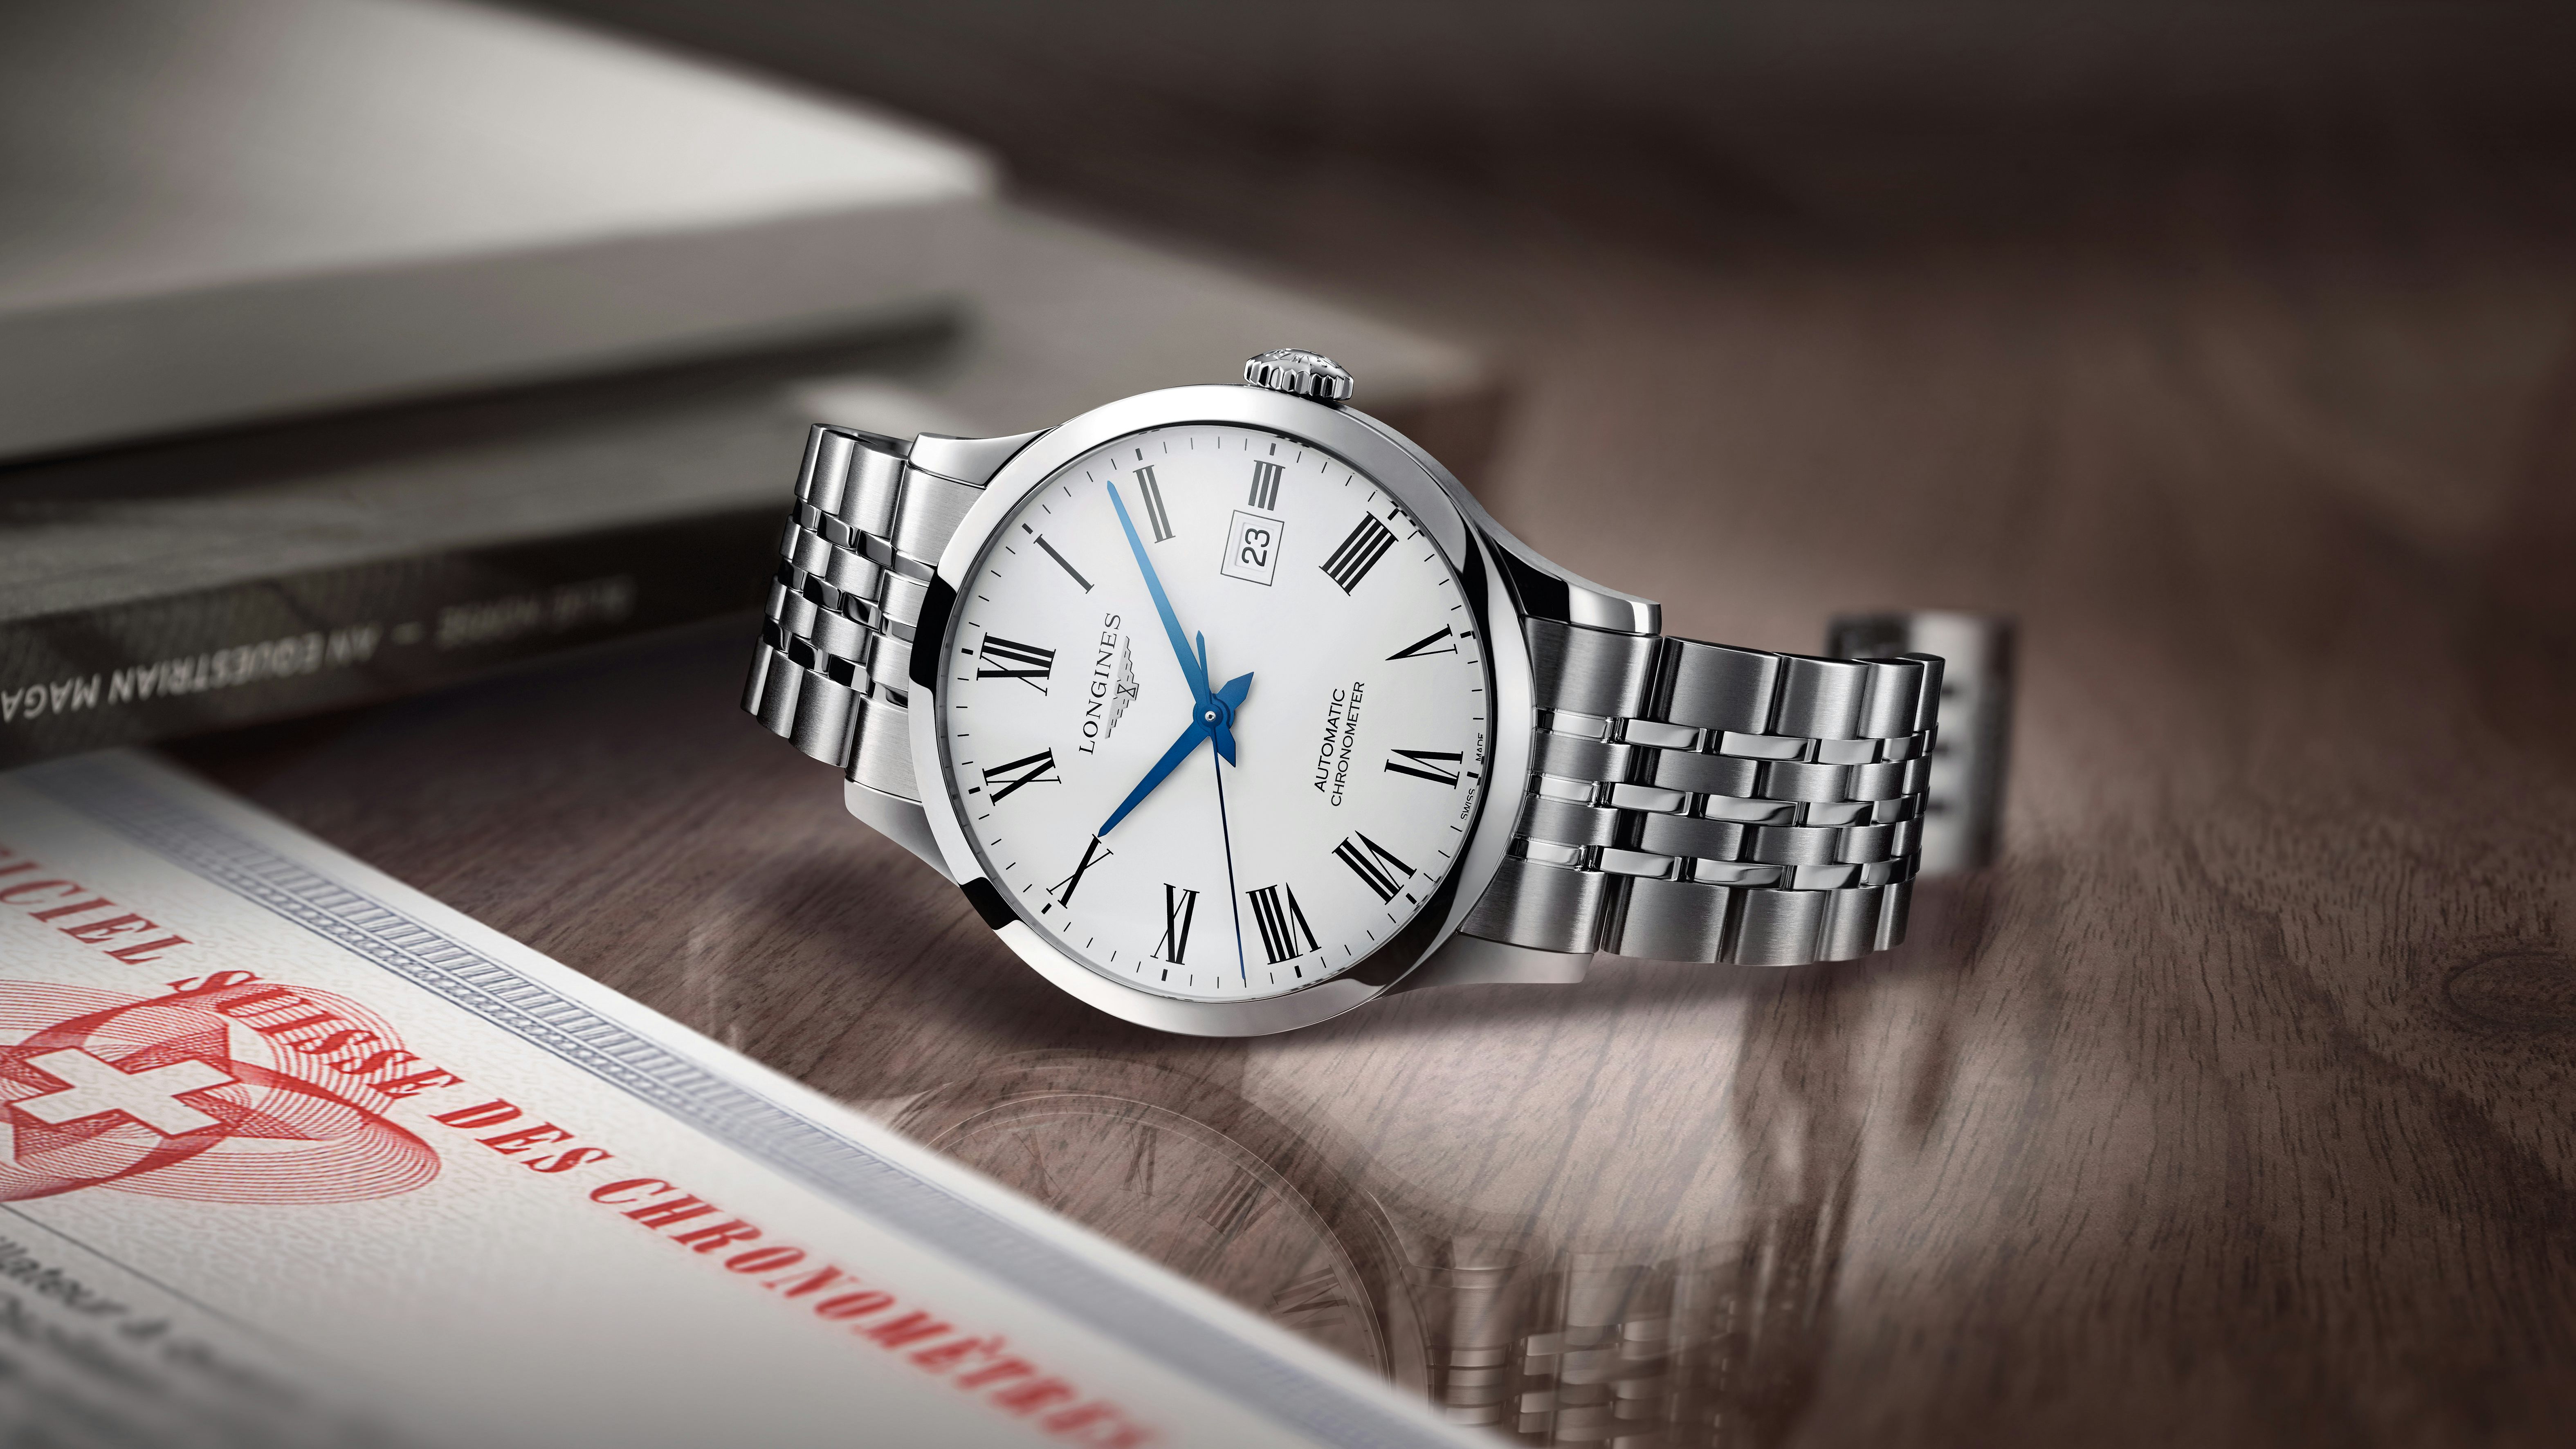 Introducing: The Longines Record, The First COSC-Certified Collection From Longines - Hodinkee